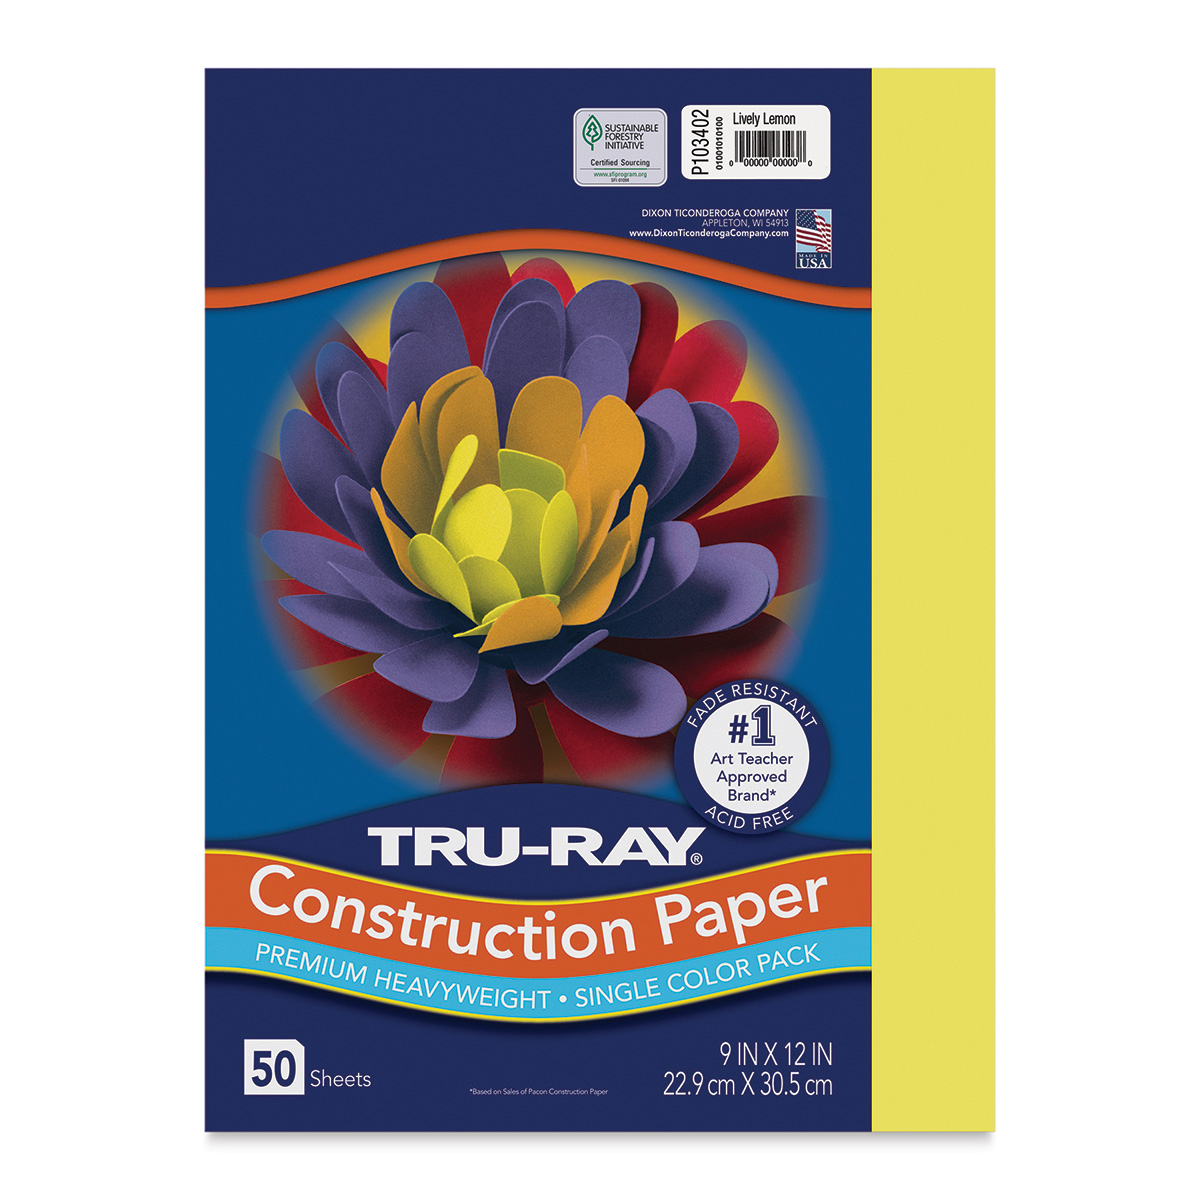 Tru-Ray Black & White Construction Paper 9 in x 12 in / 144 Sheets